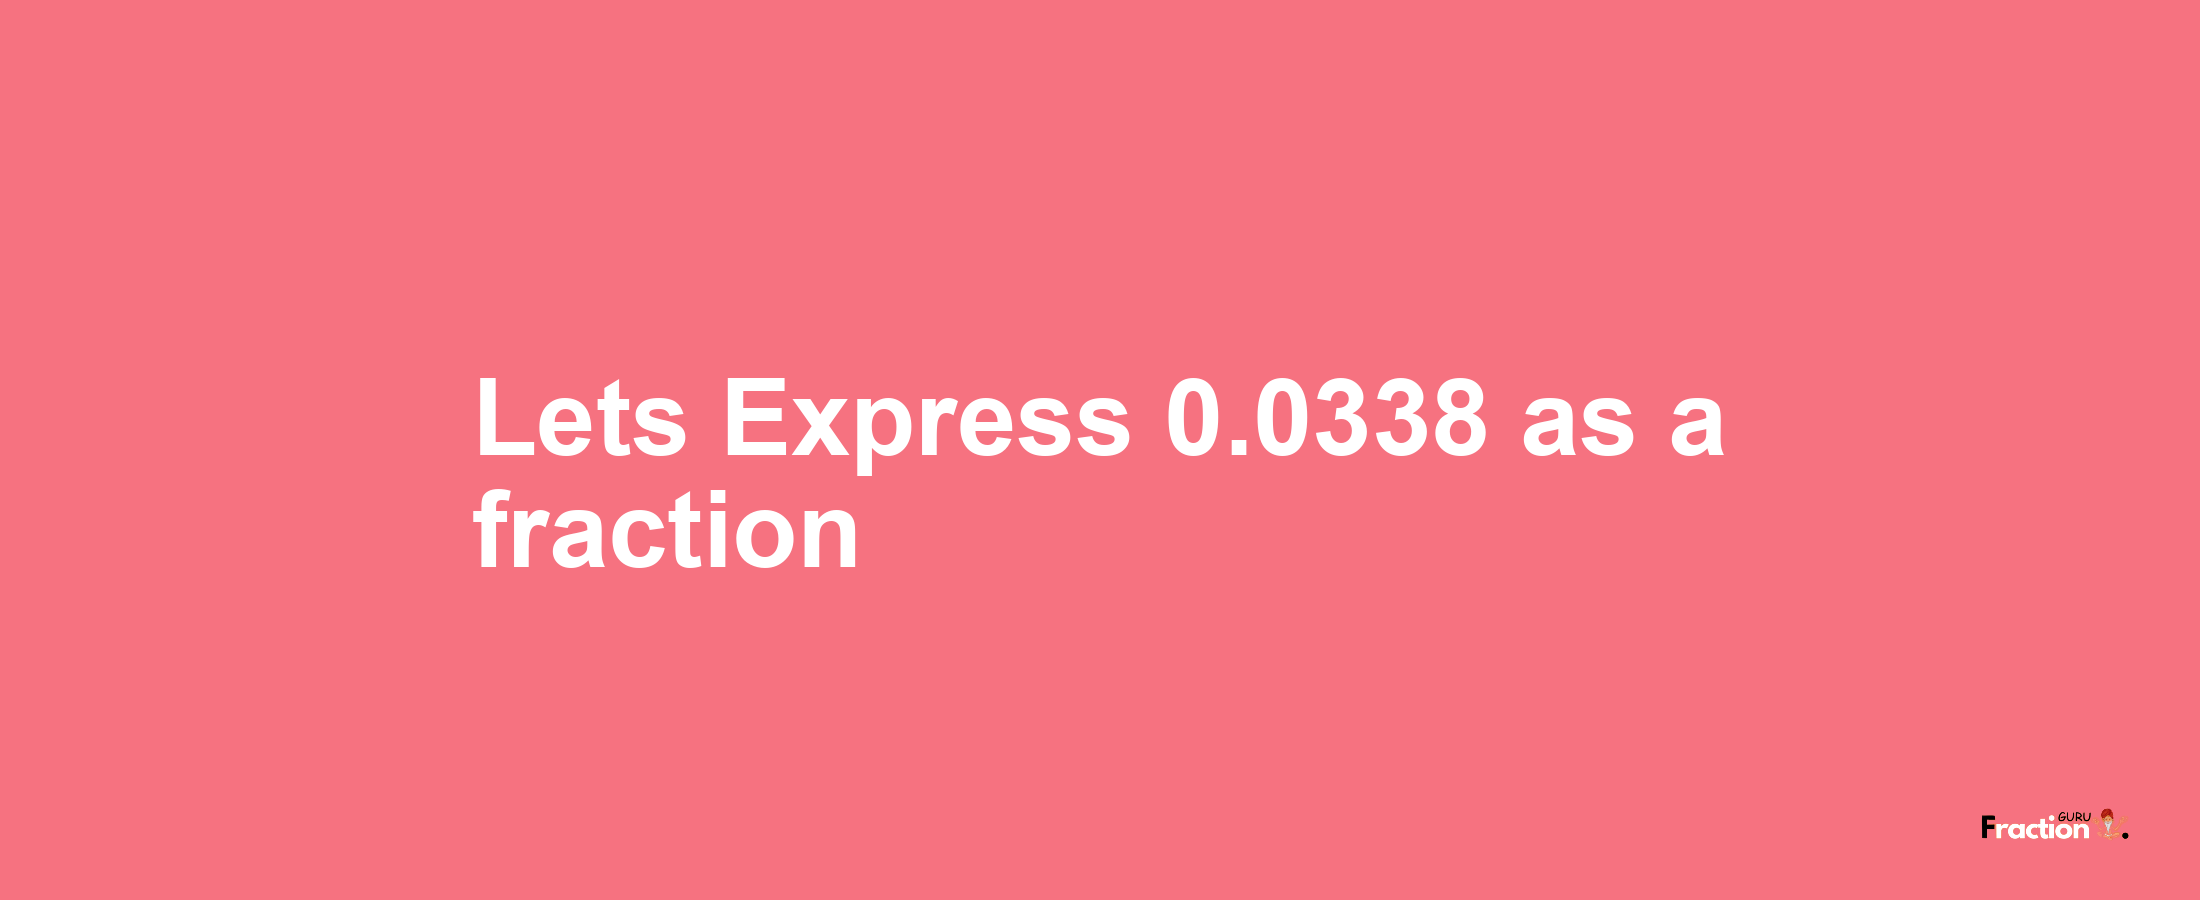 Lets Express 0.0338 as afraction